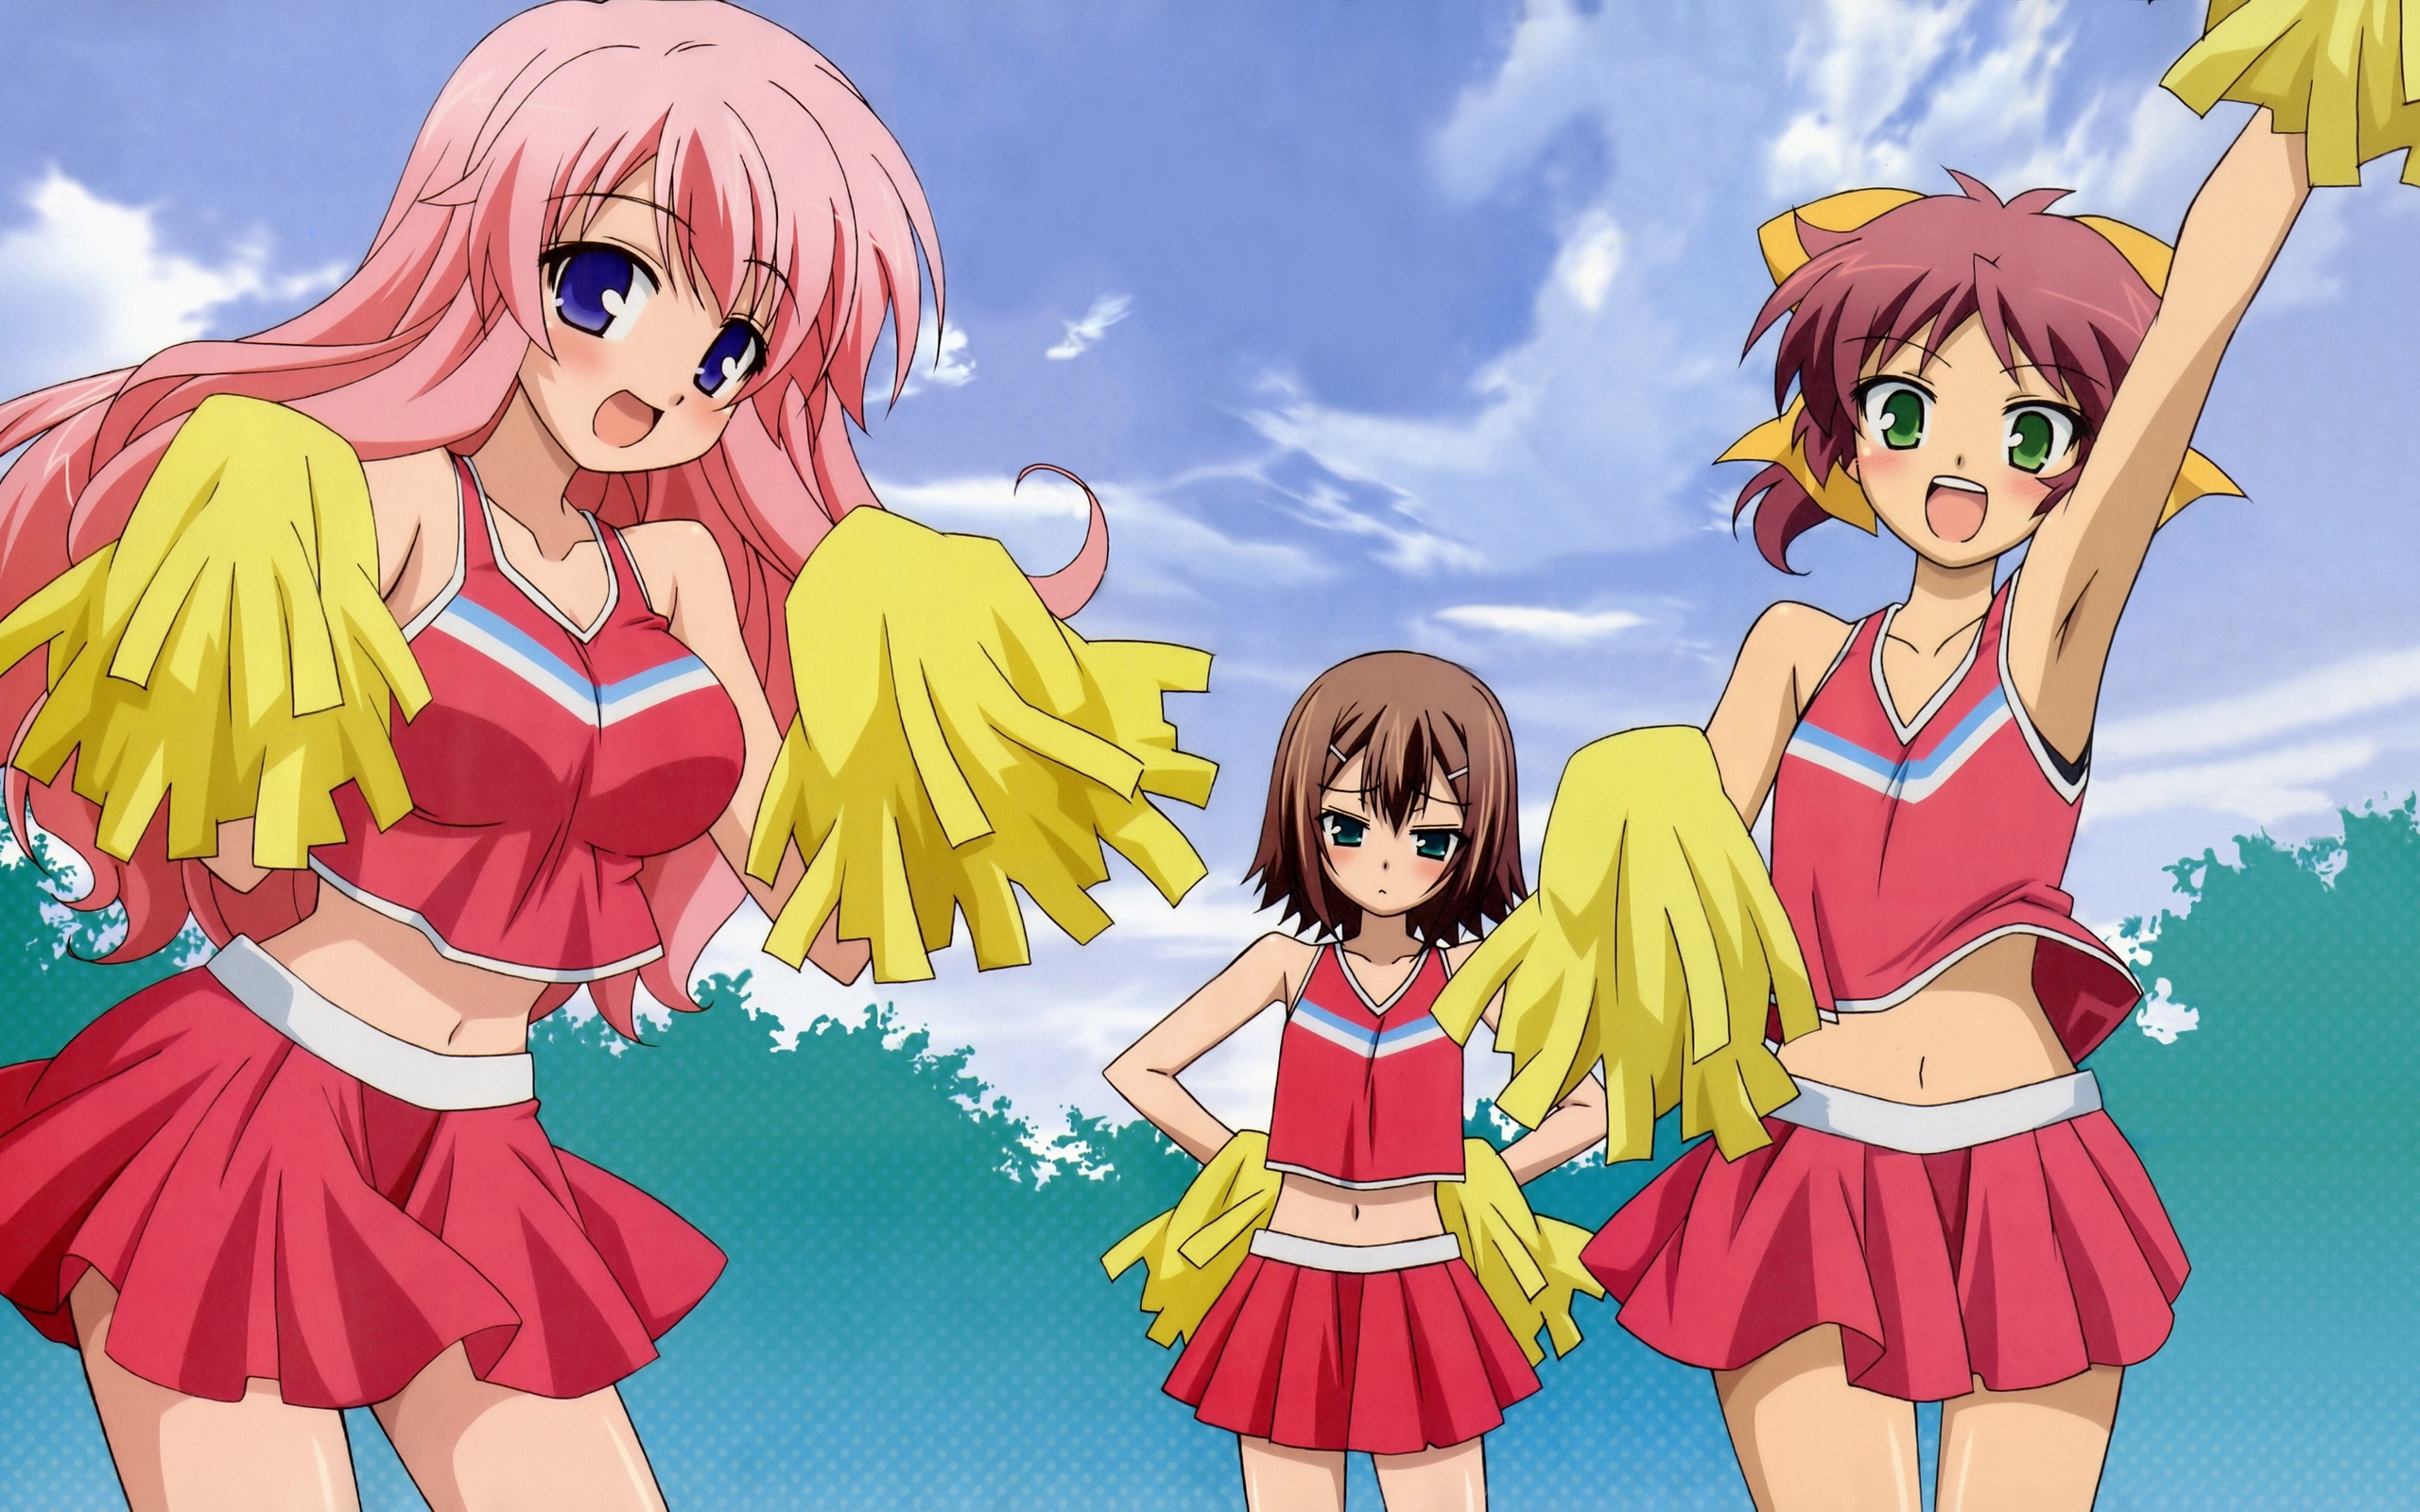 Download wallpaper 2560x1600 anime, girls, group, support, dance HD